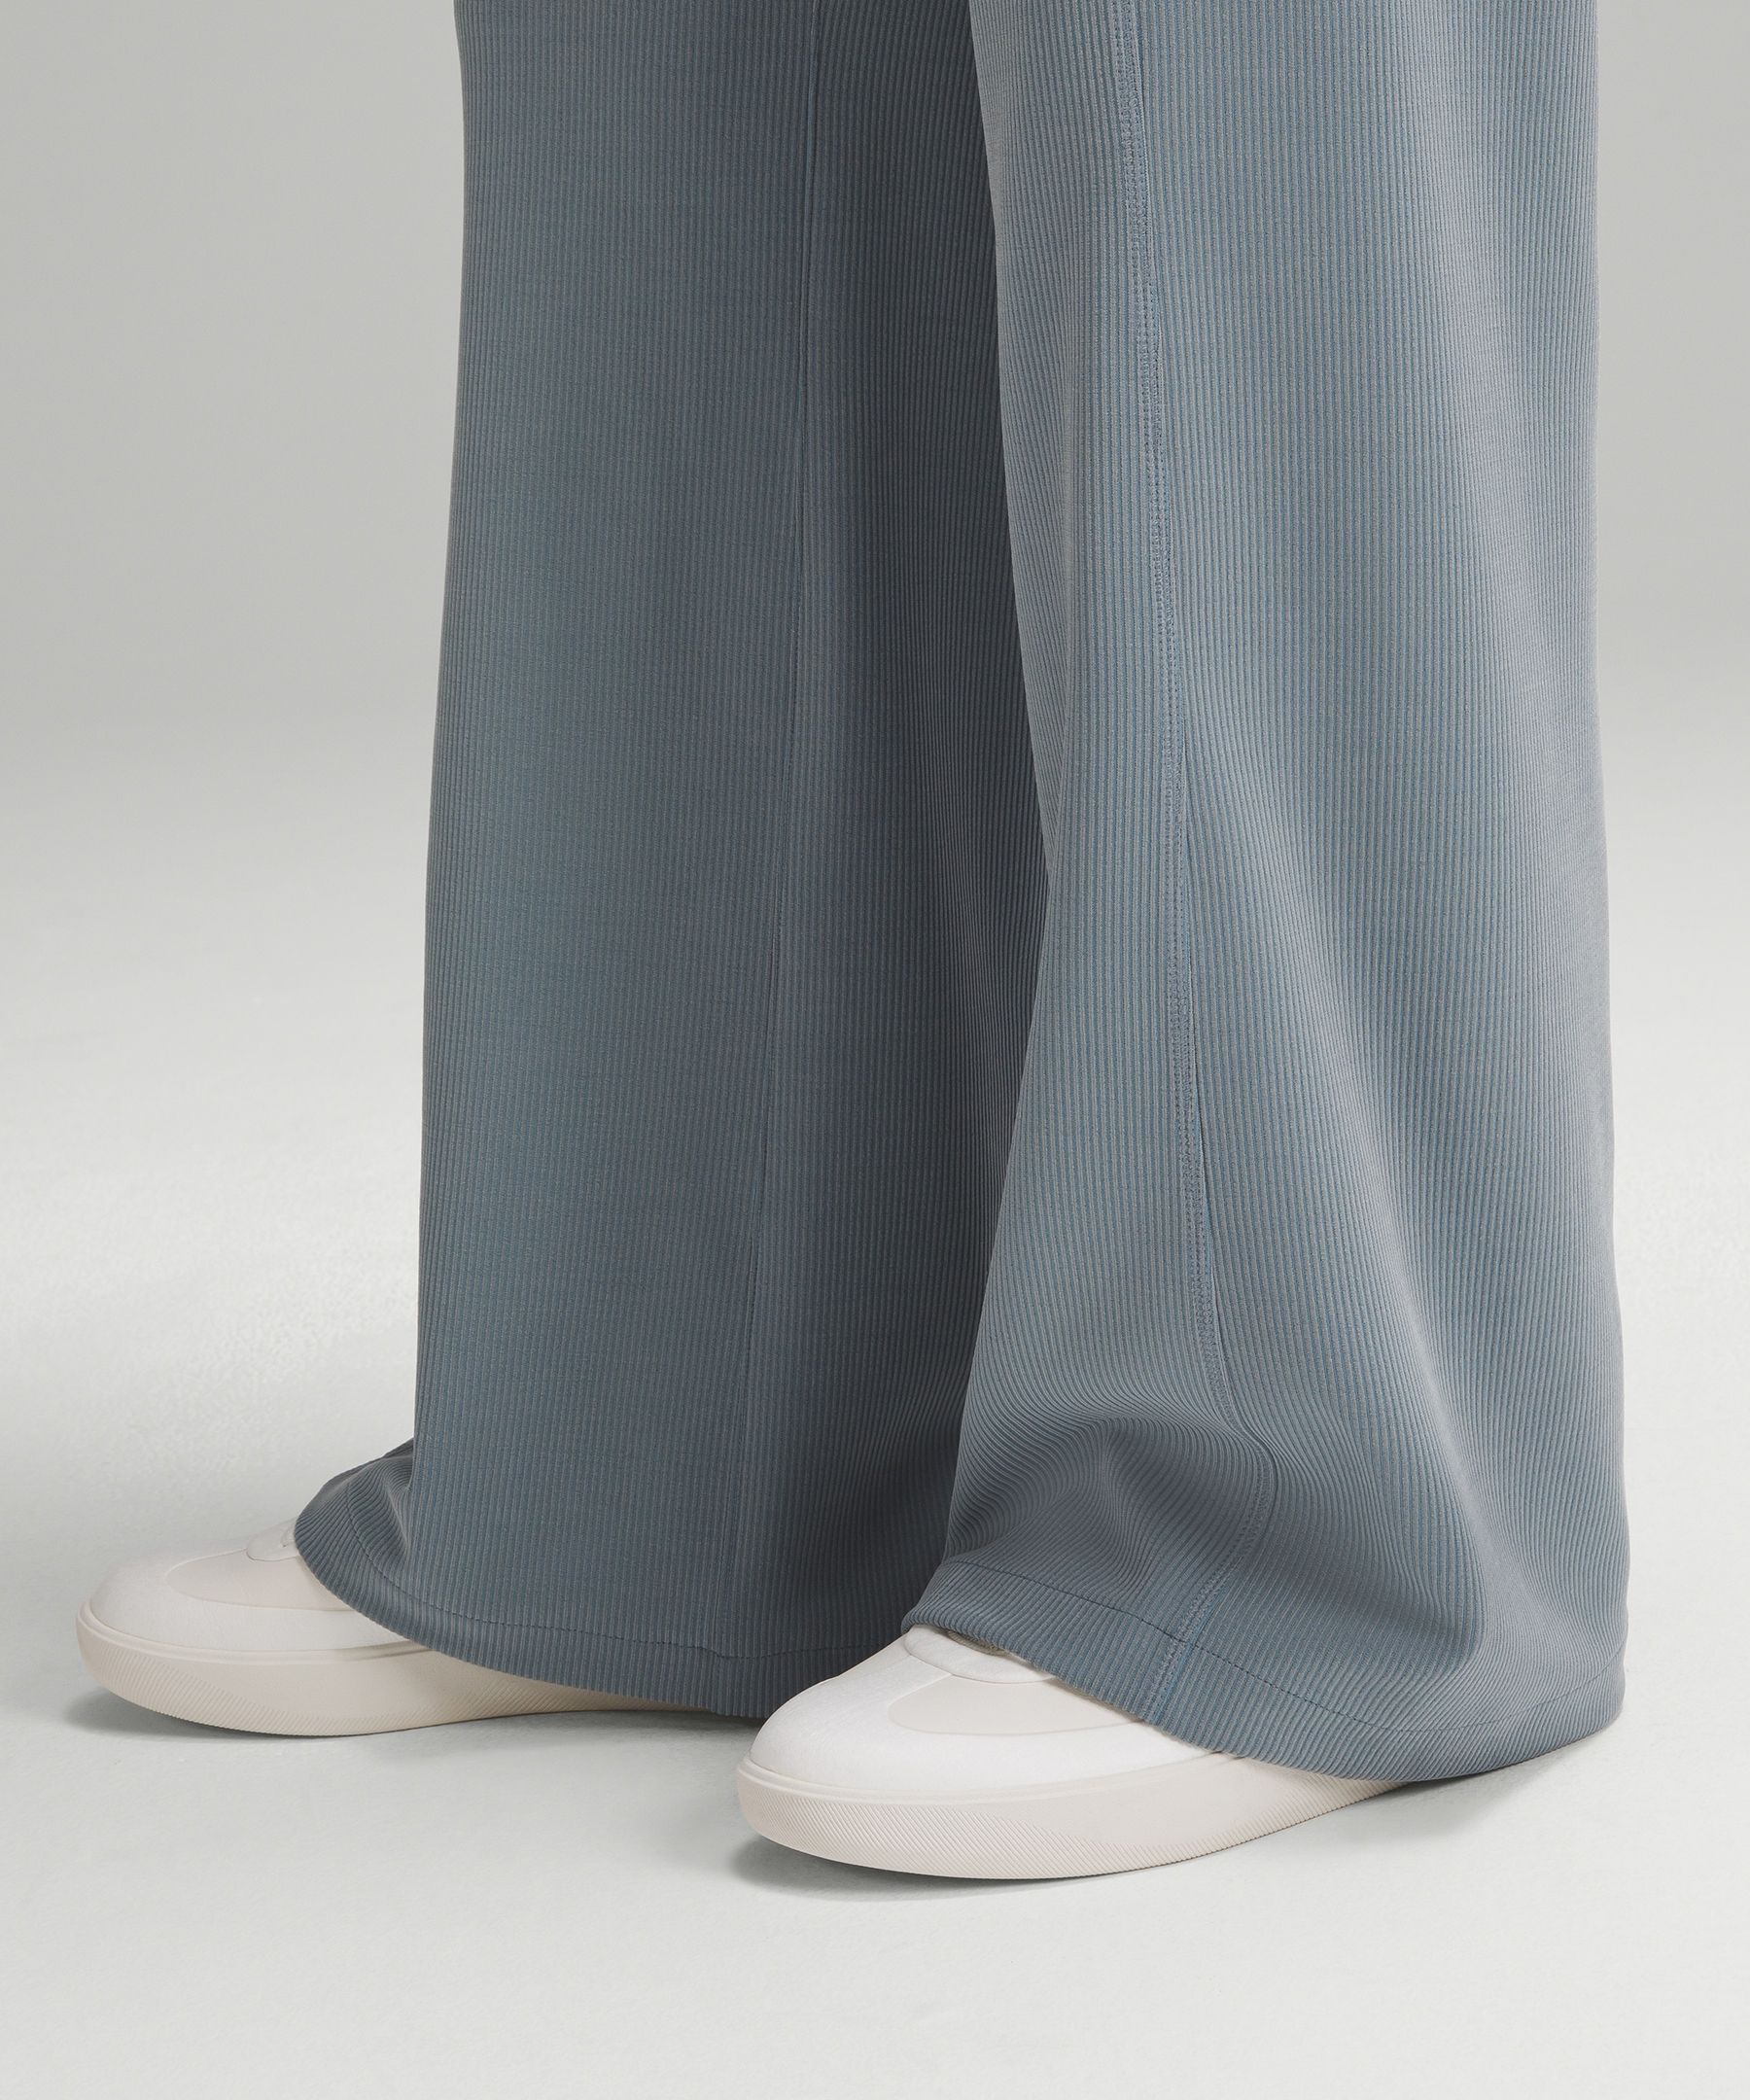 Ribbed Softstreme Mid-Rise Pant 32.5, Bottoms